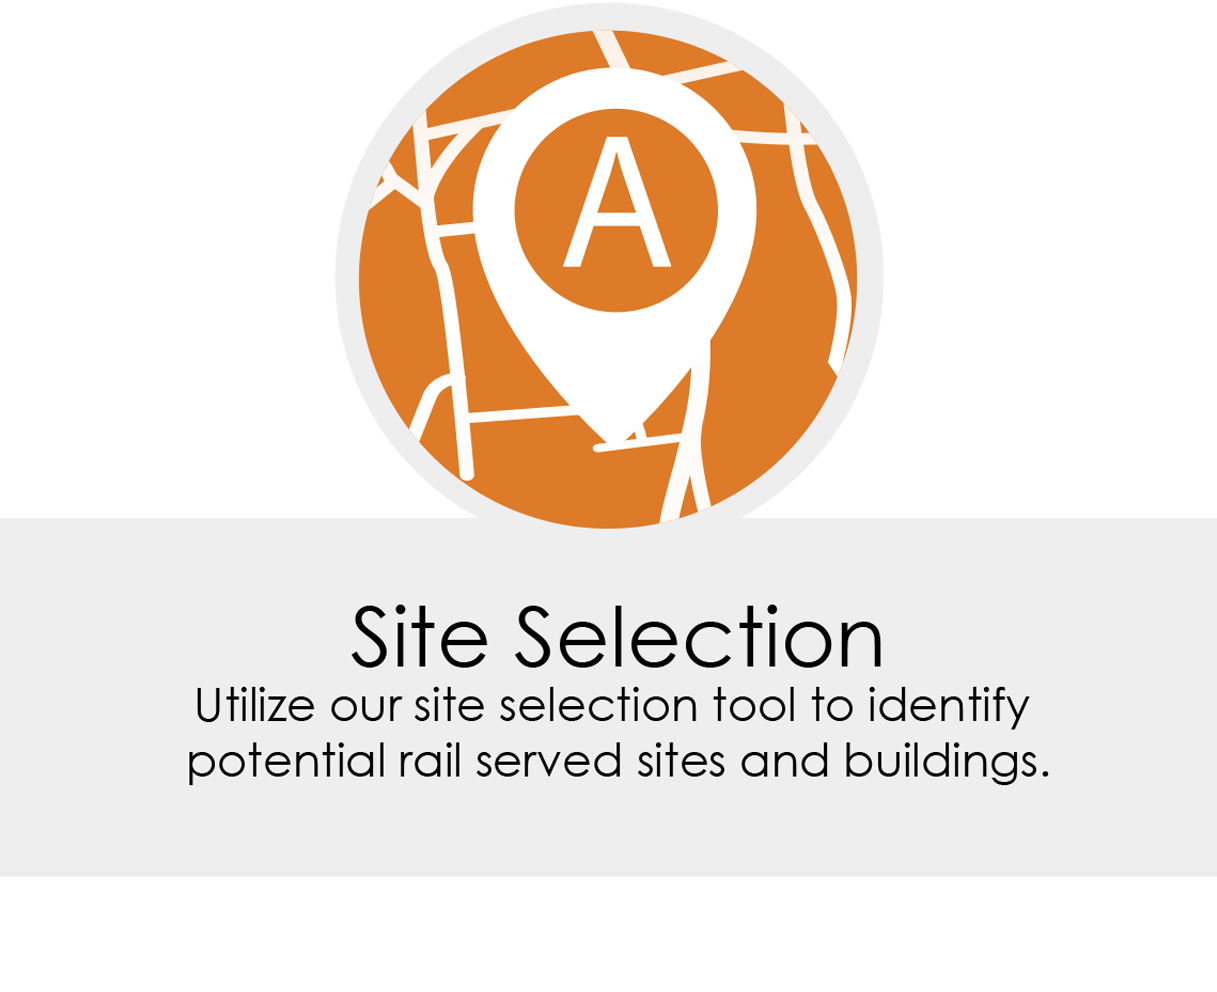 Site selection for rail served locations